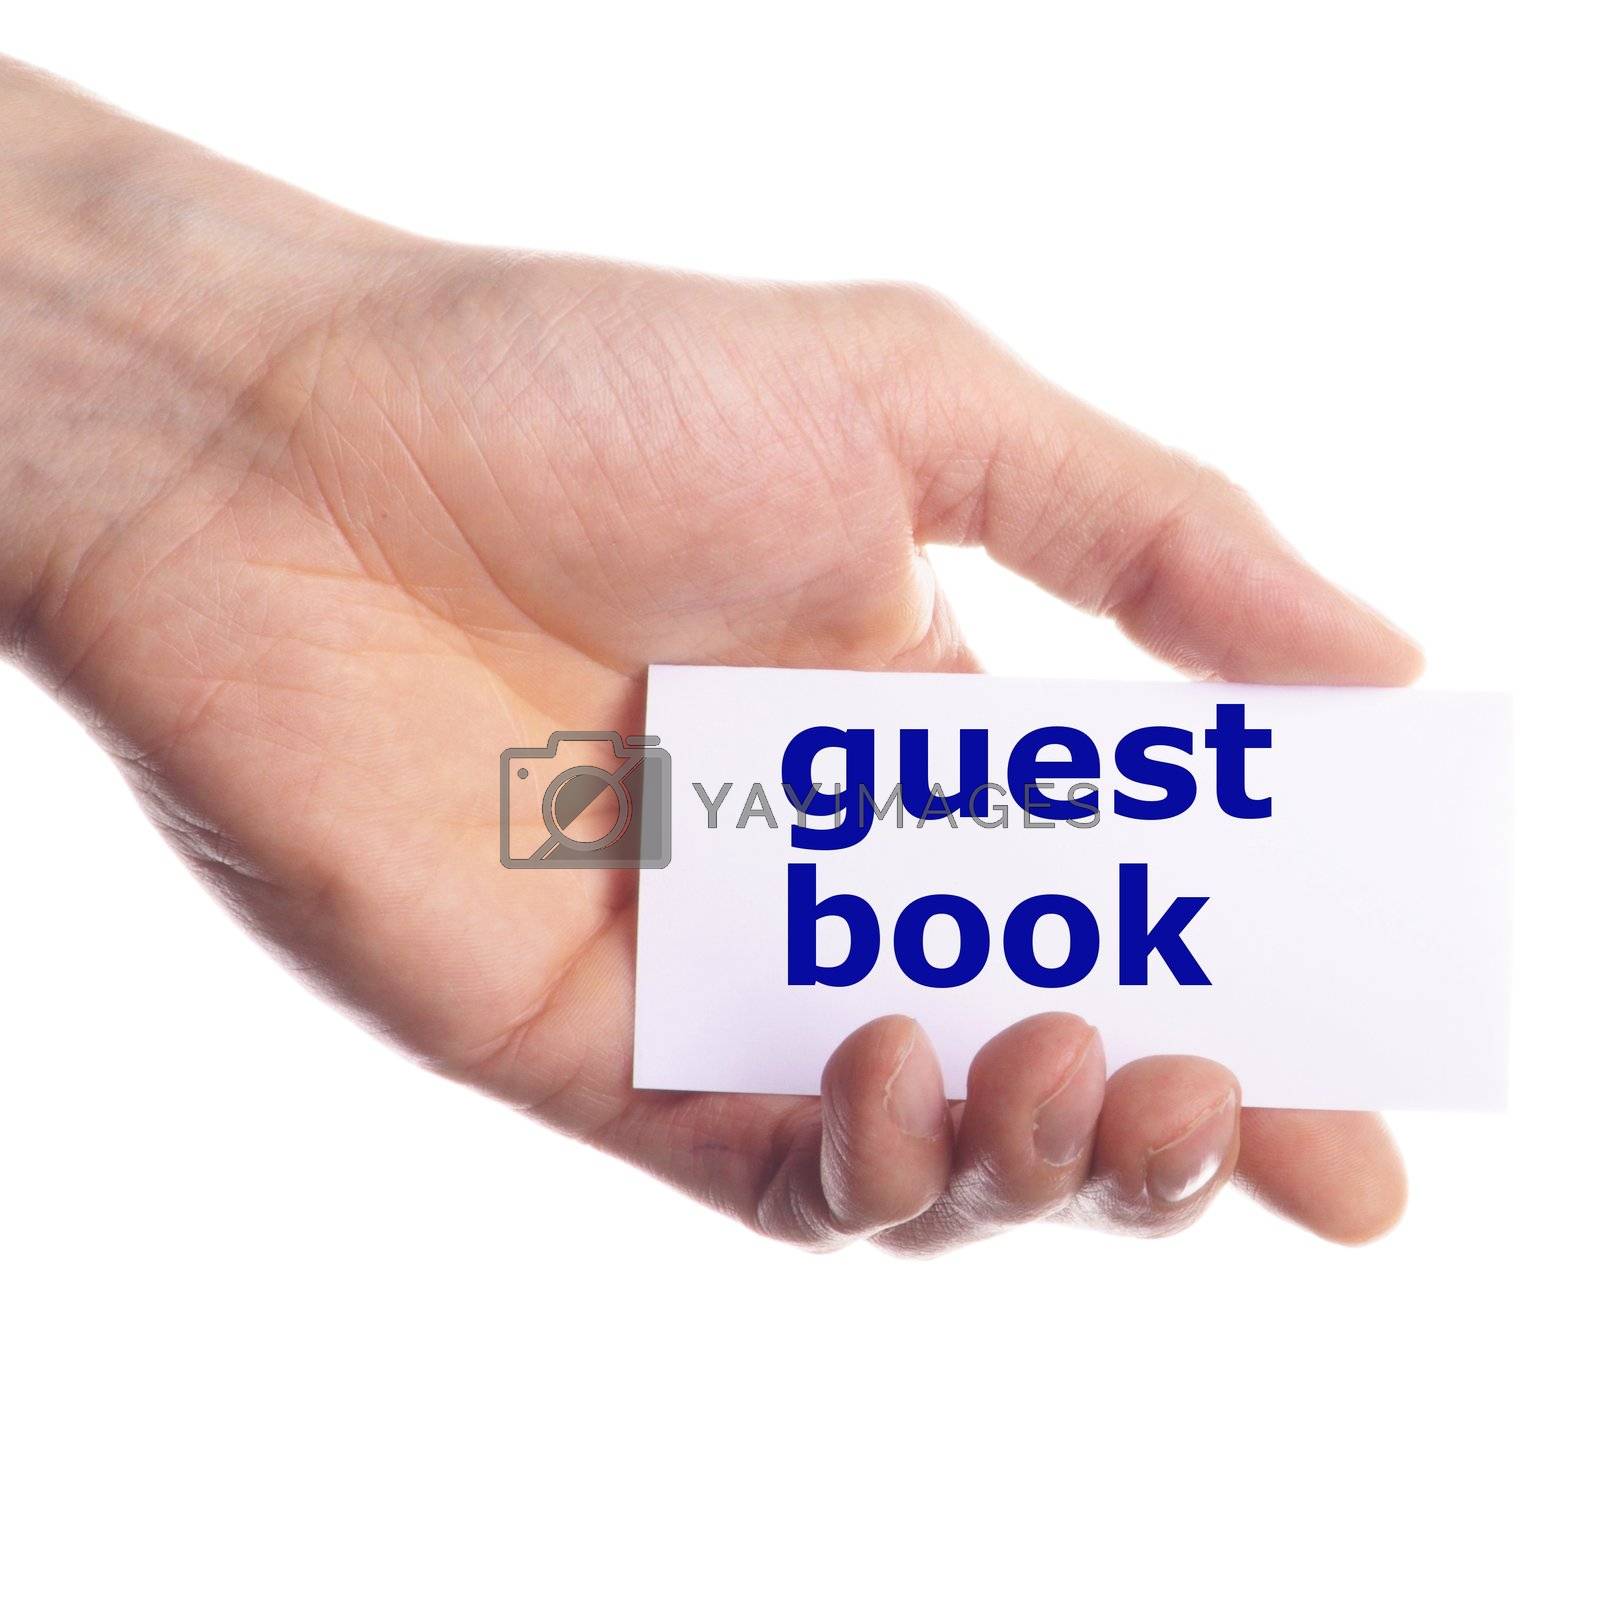 Royalty free image of guest book by gunnar3000